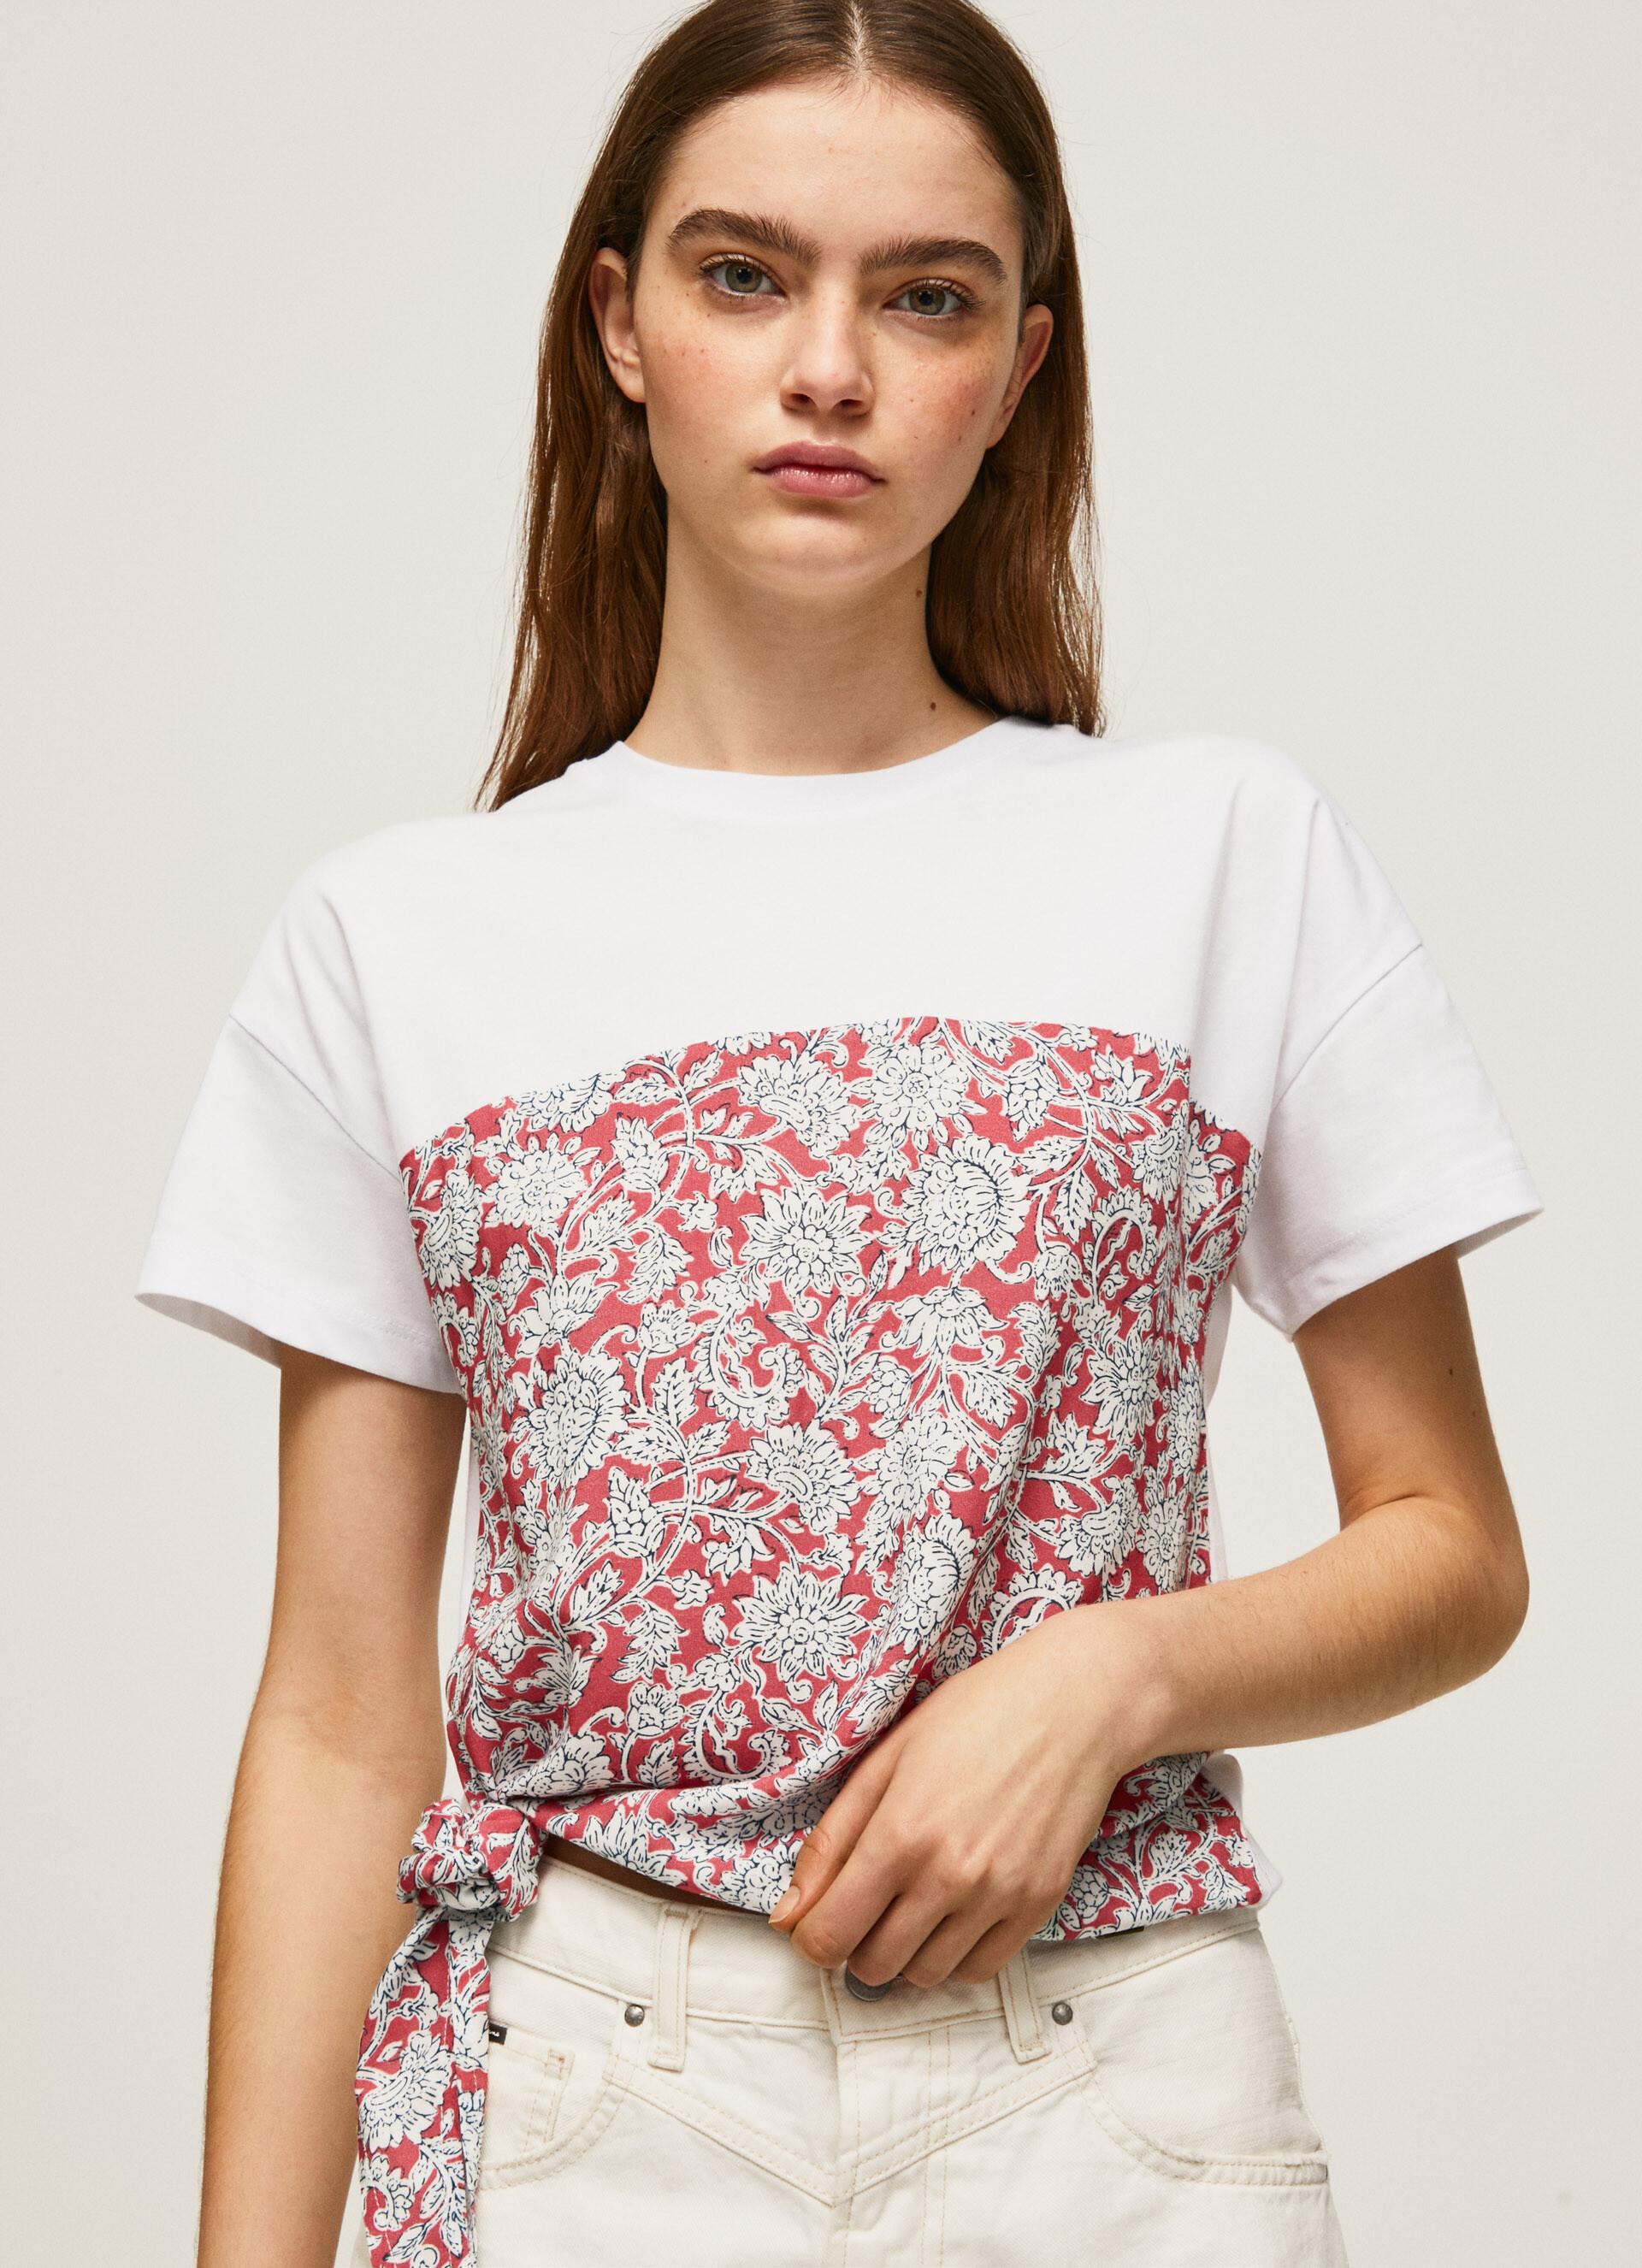 Pepe Jeans - Patterned cotton T-shirt, Red, large image number 2